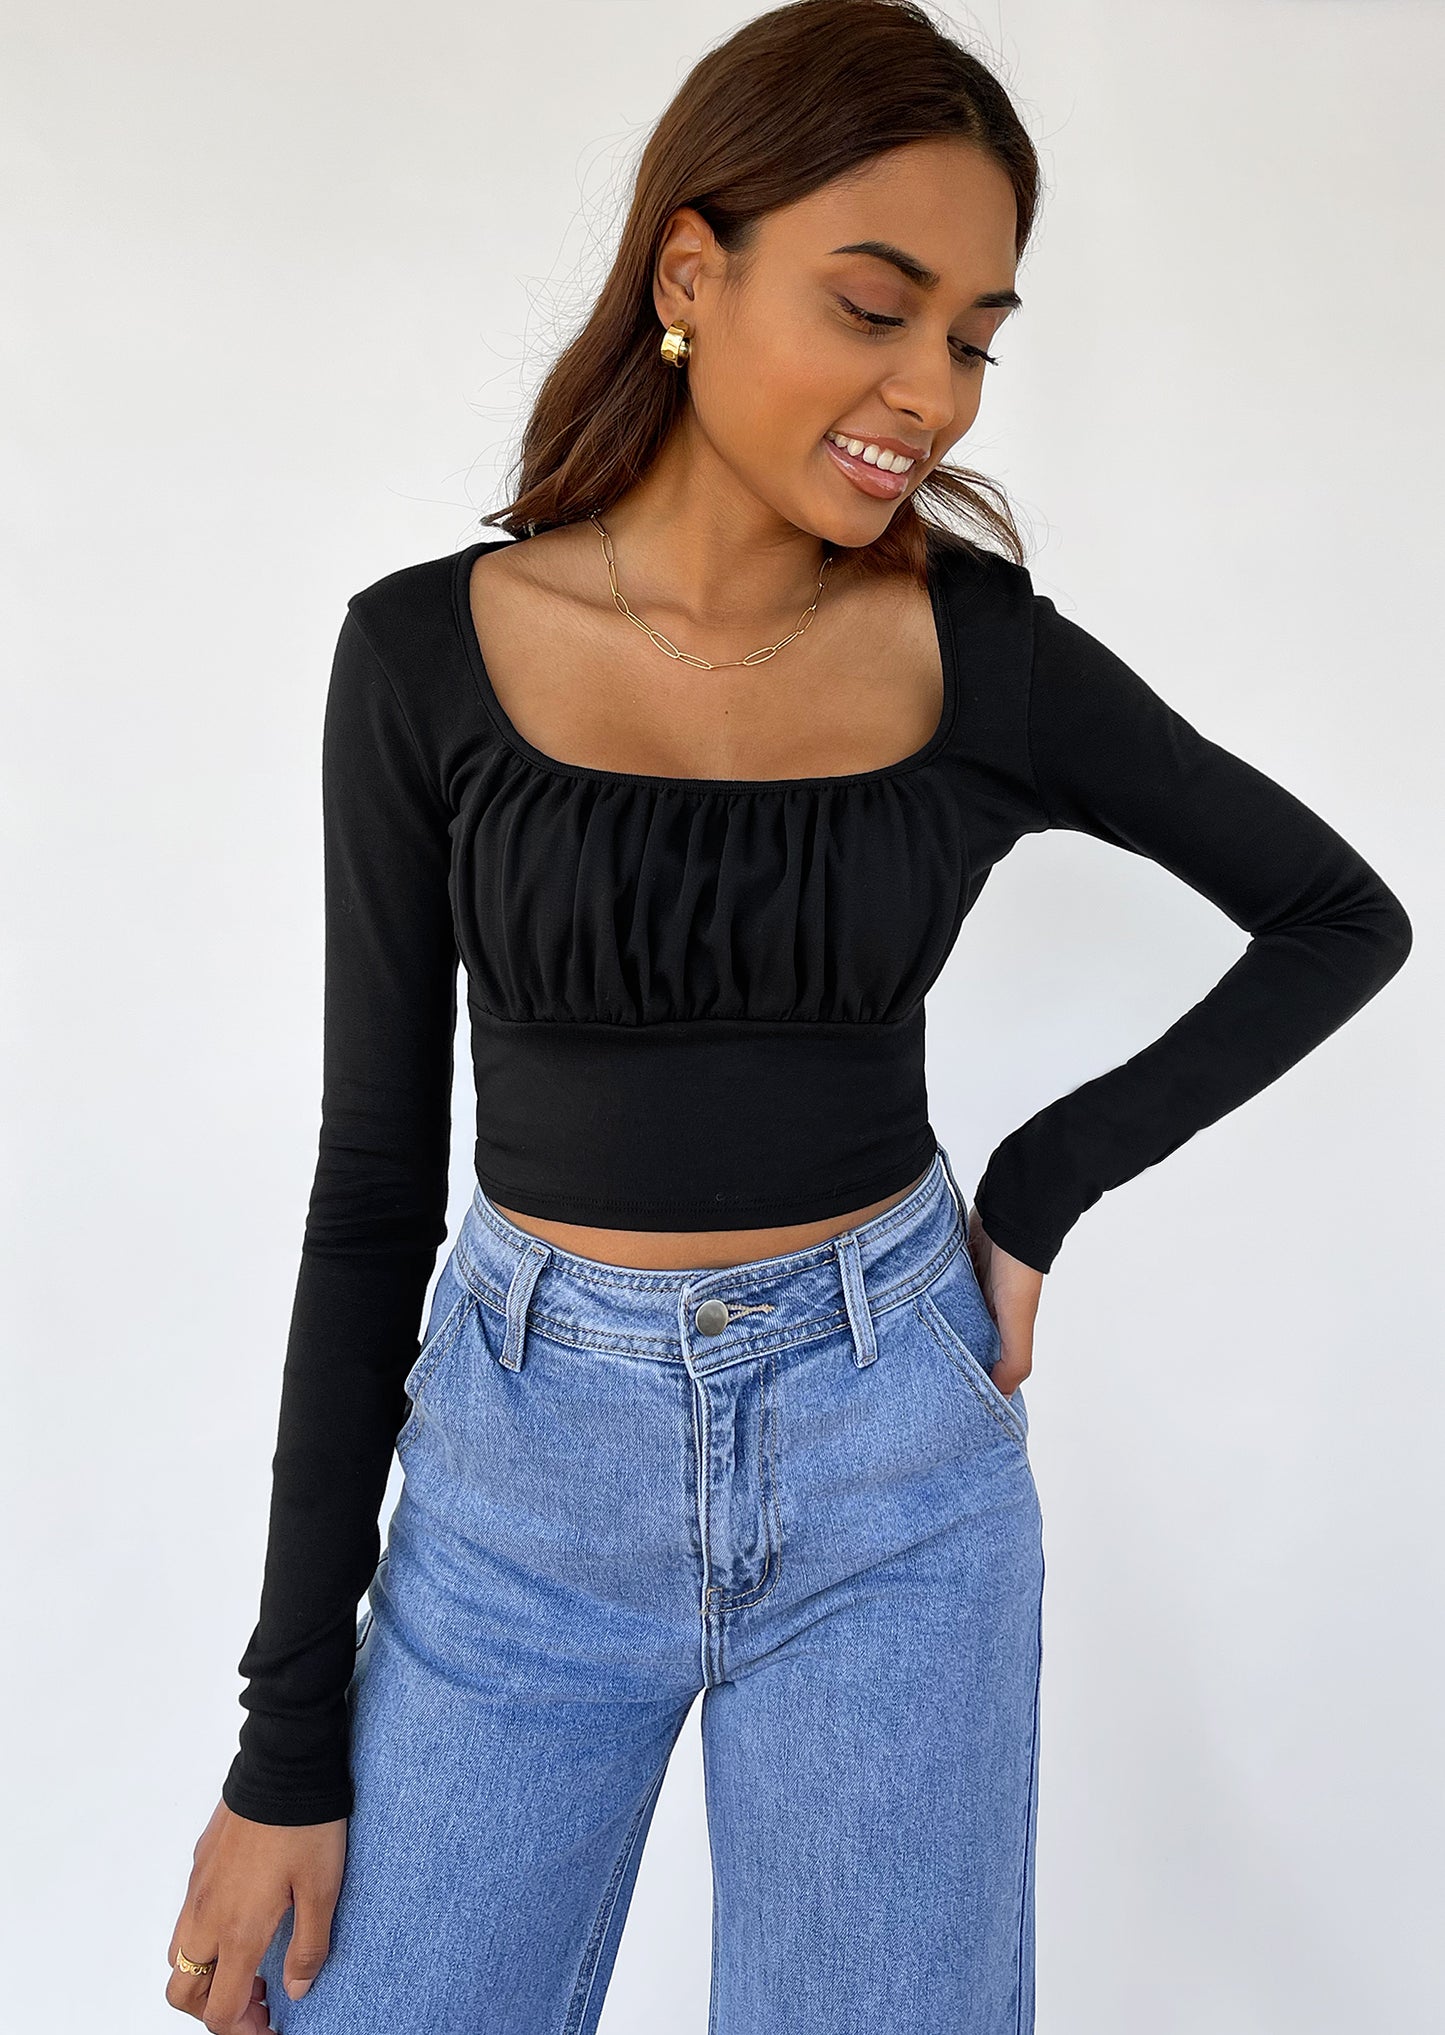 Ruched long sleeve top in black